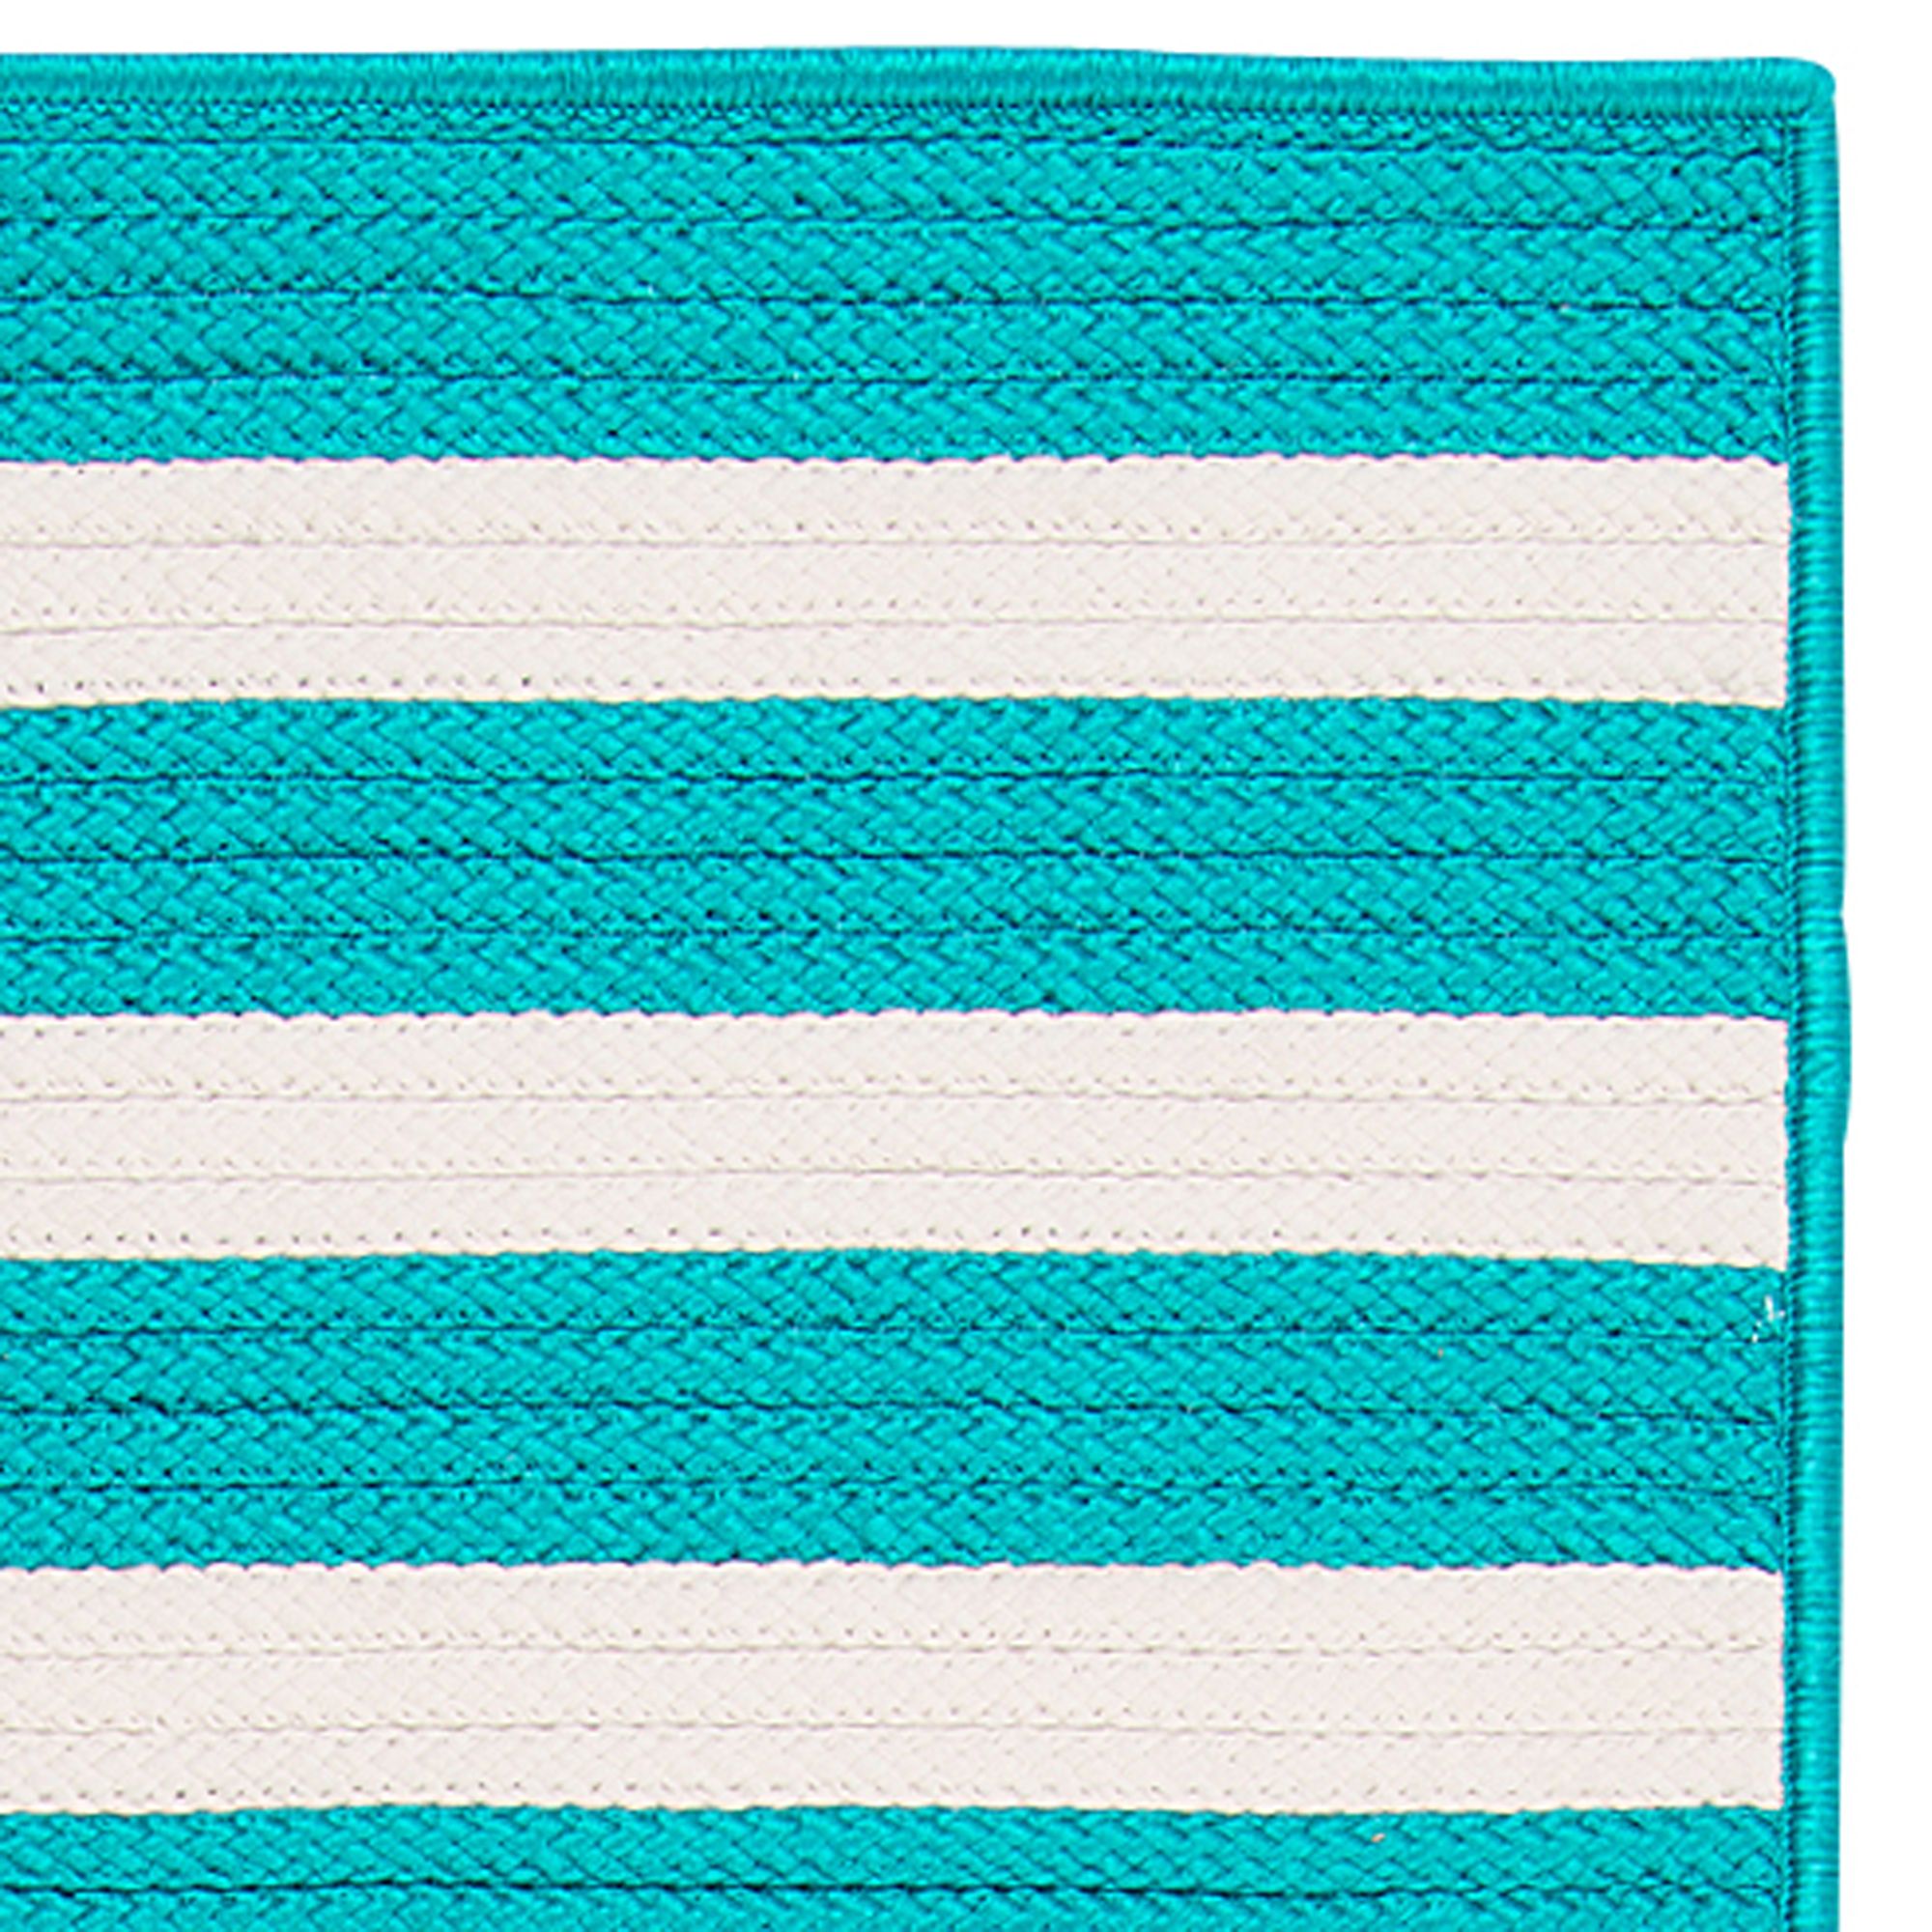 Colonial Mills 2 5 X 13 Aqua Blue And, Red And White Striped Rug Runner